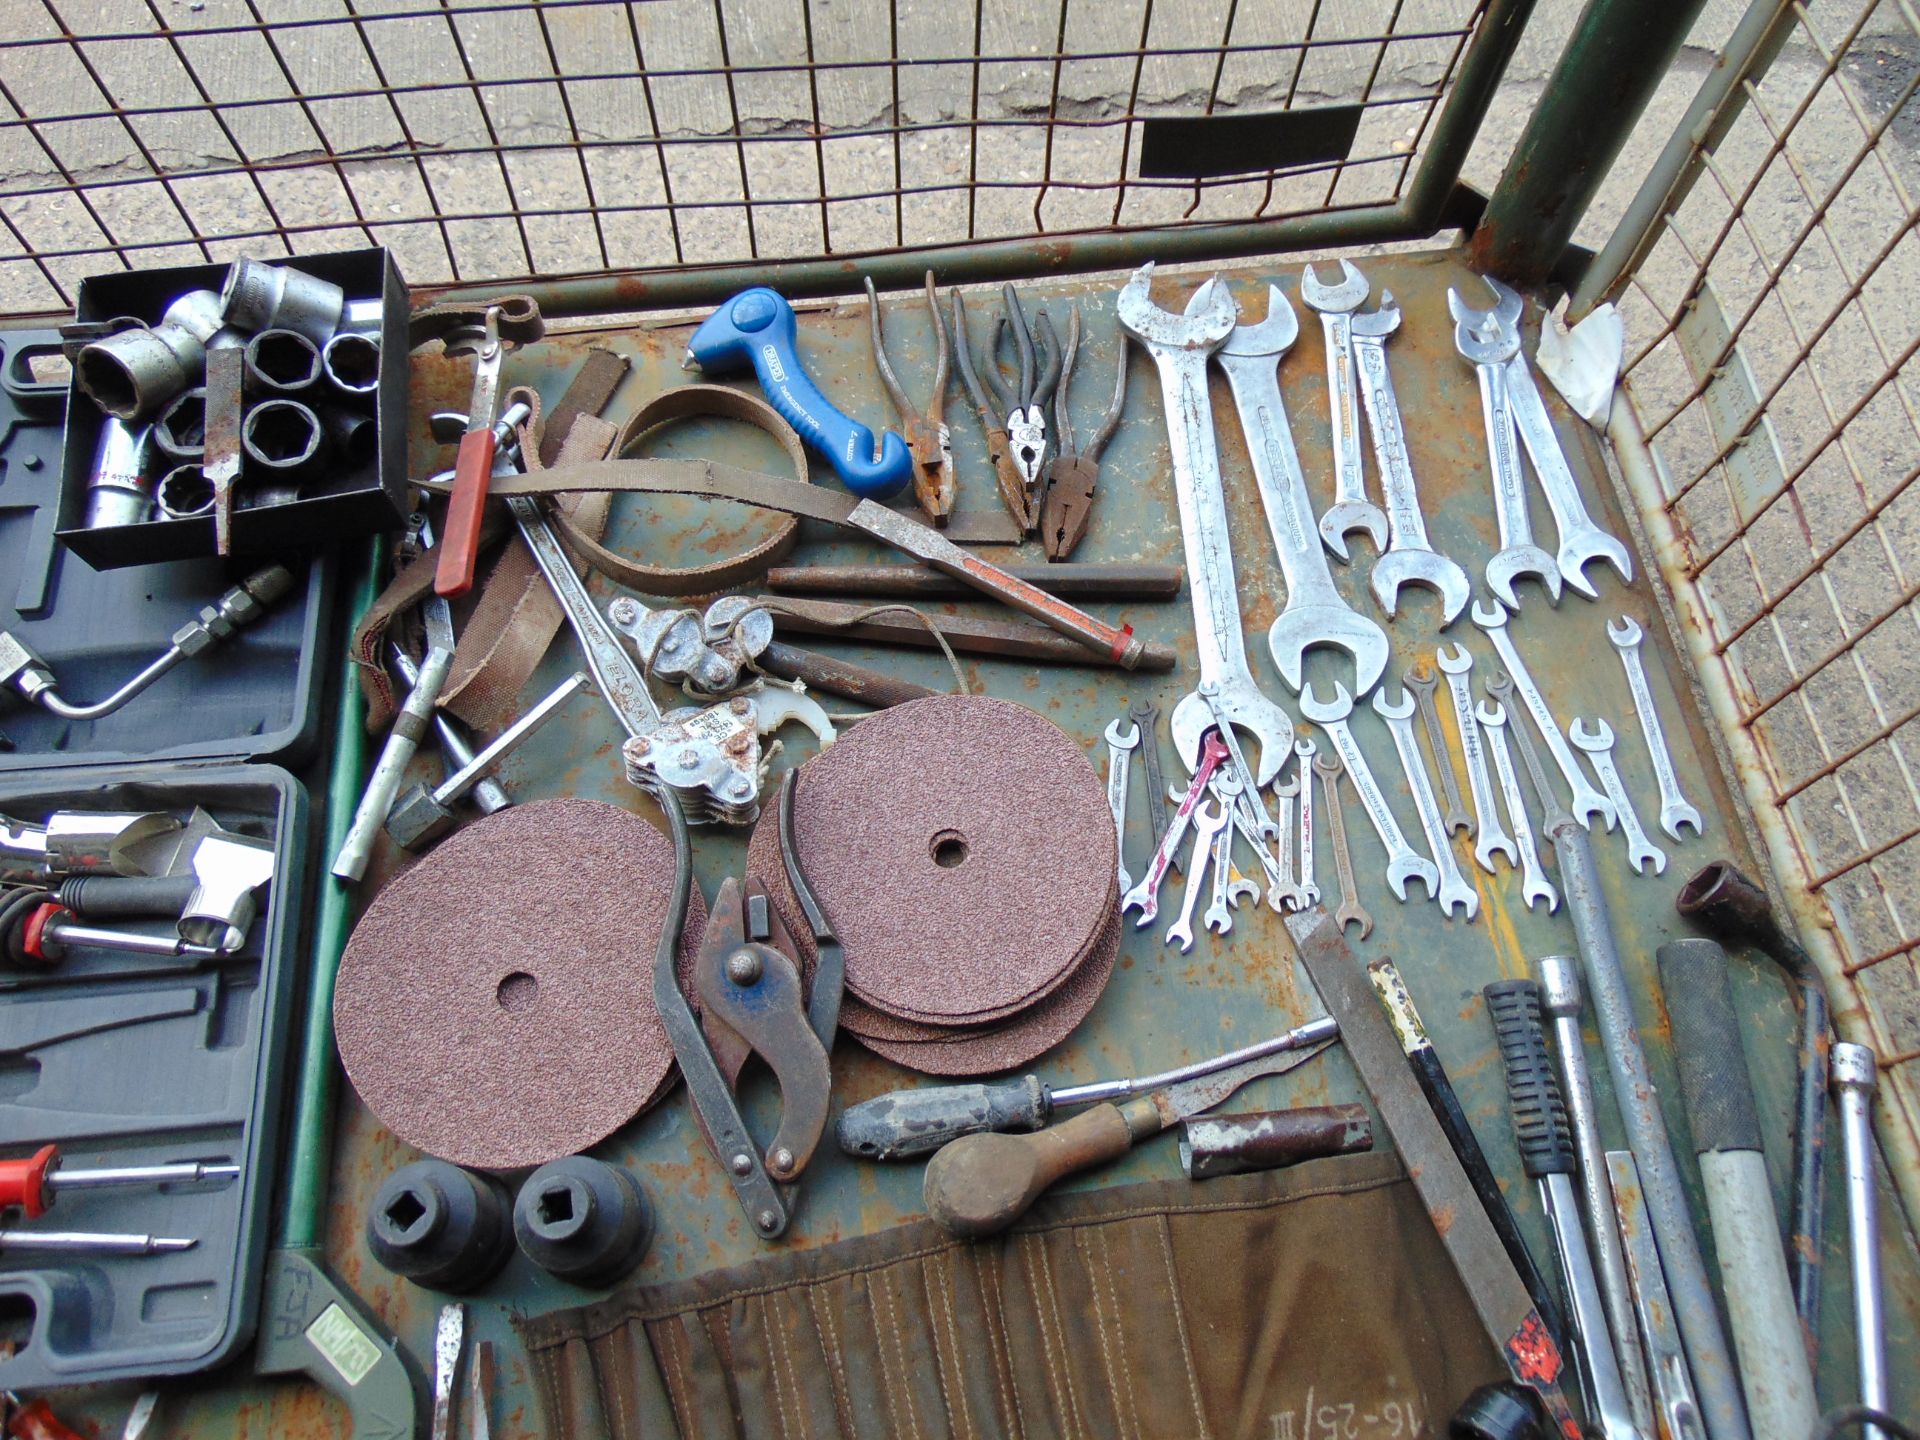 1 x Stillage of Workshop Tools, Spanners, Sockets, Lathe Tools, etc, Approx 120 Items - Image 6 of 9